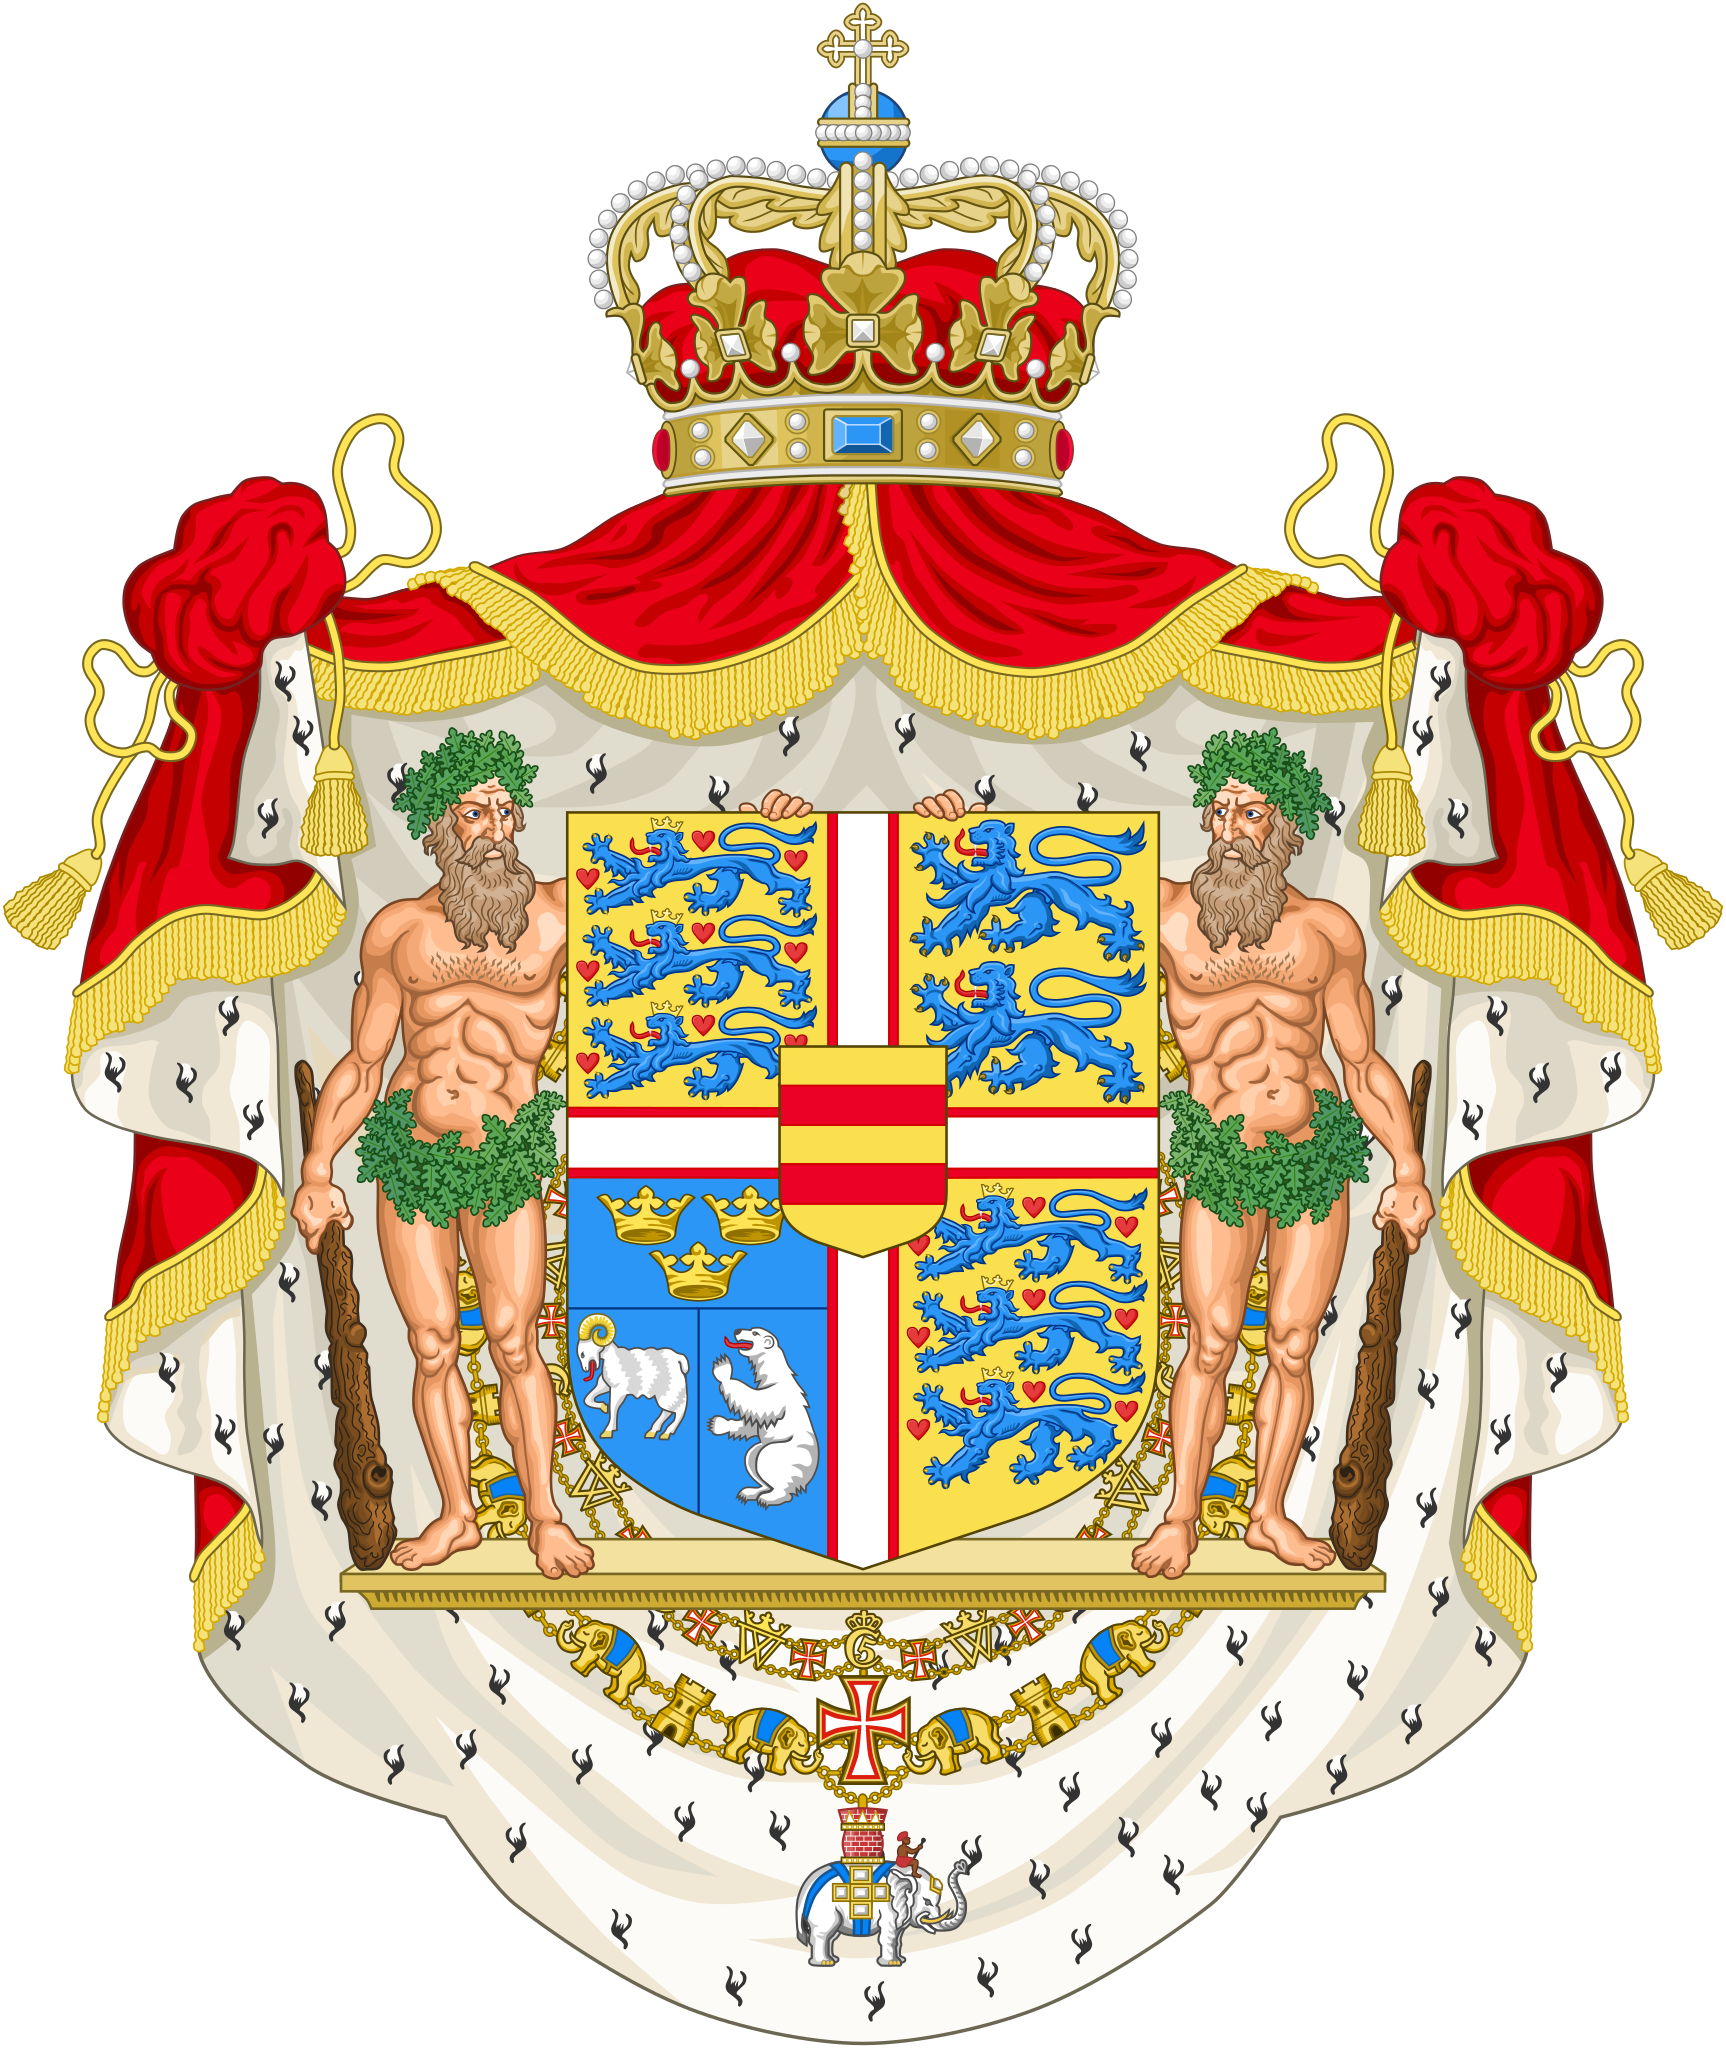 1726px-Royal_coat_of_arms_of_Denmark.svg.png